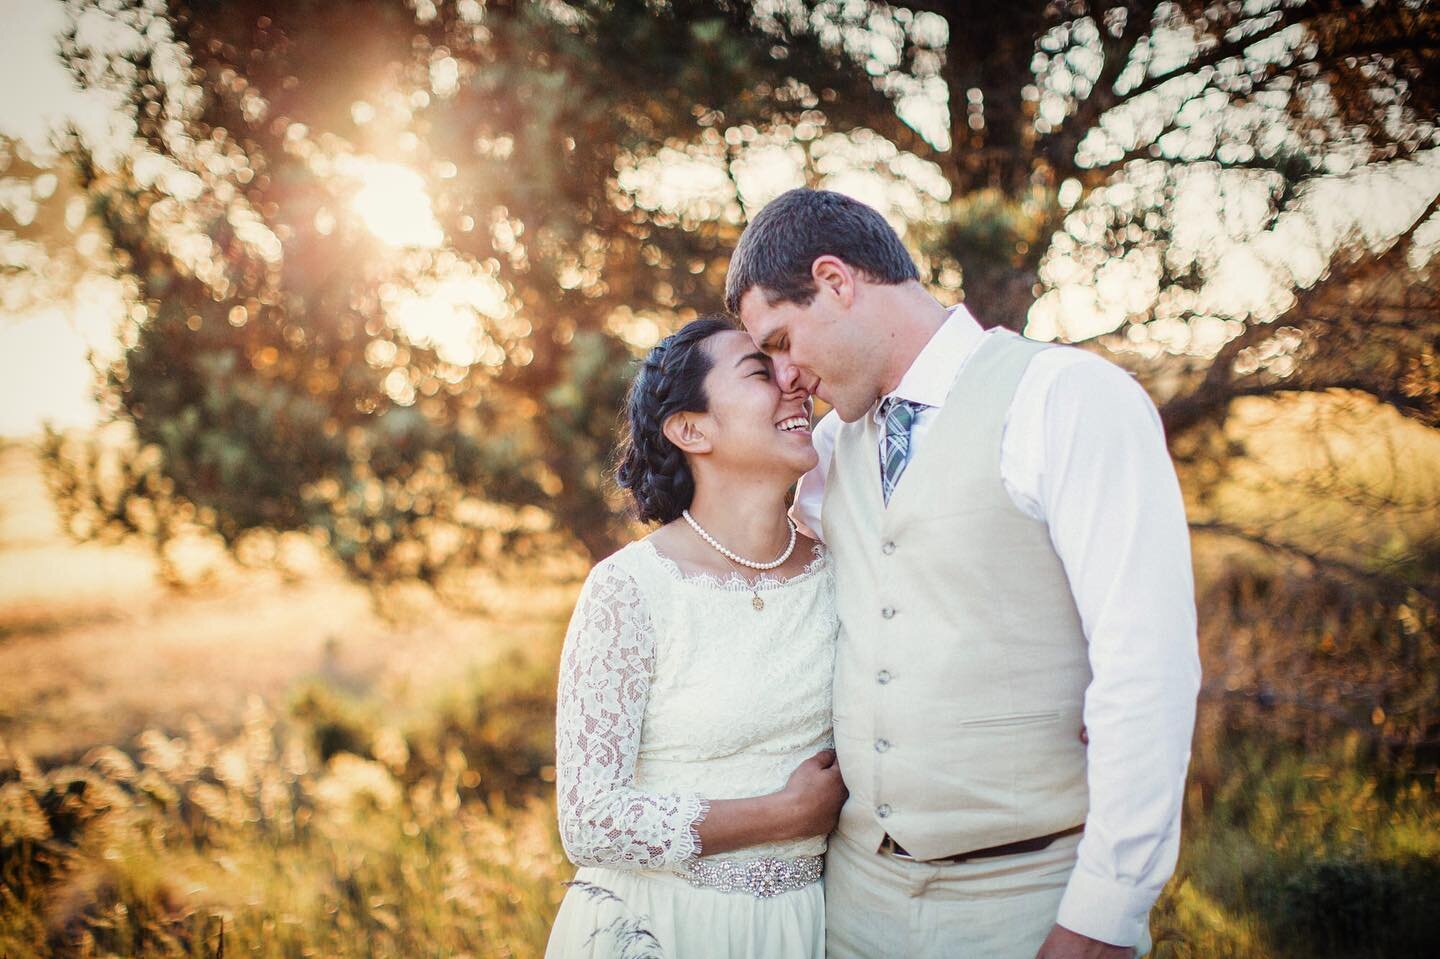 in a world
full of temporary things

you are
a perpetual 
feeling.

&mdash;Sanober Khan

📸 by @anneclairebrun 

#weddingdestination #springranchmendocino #wedding #mendocino #coastalpreserve #coastalwedding #california #love #life #happilyeverafter 